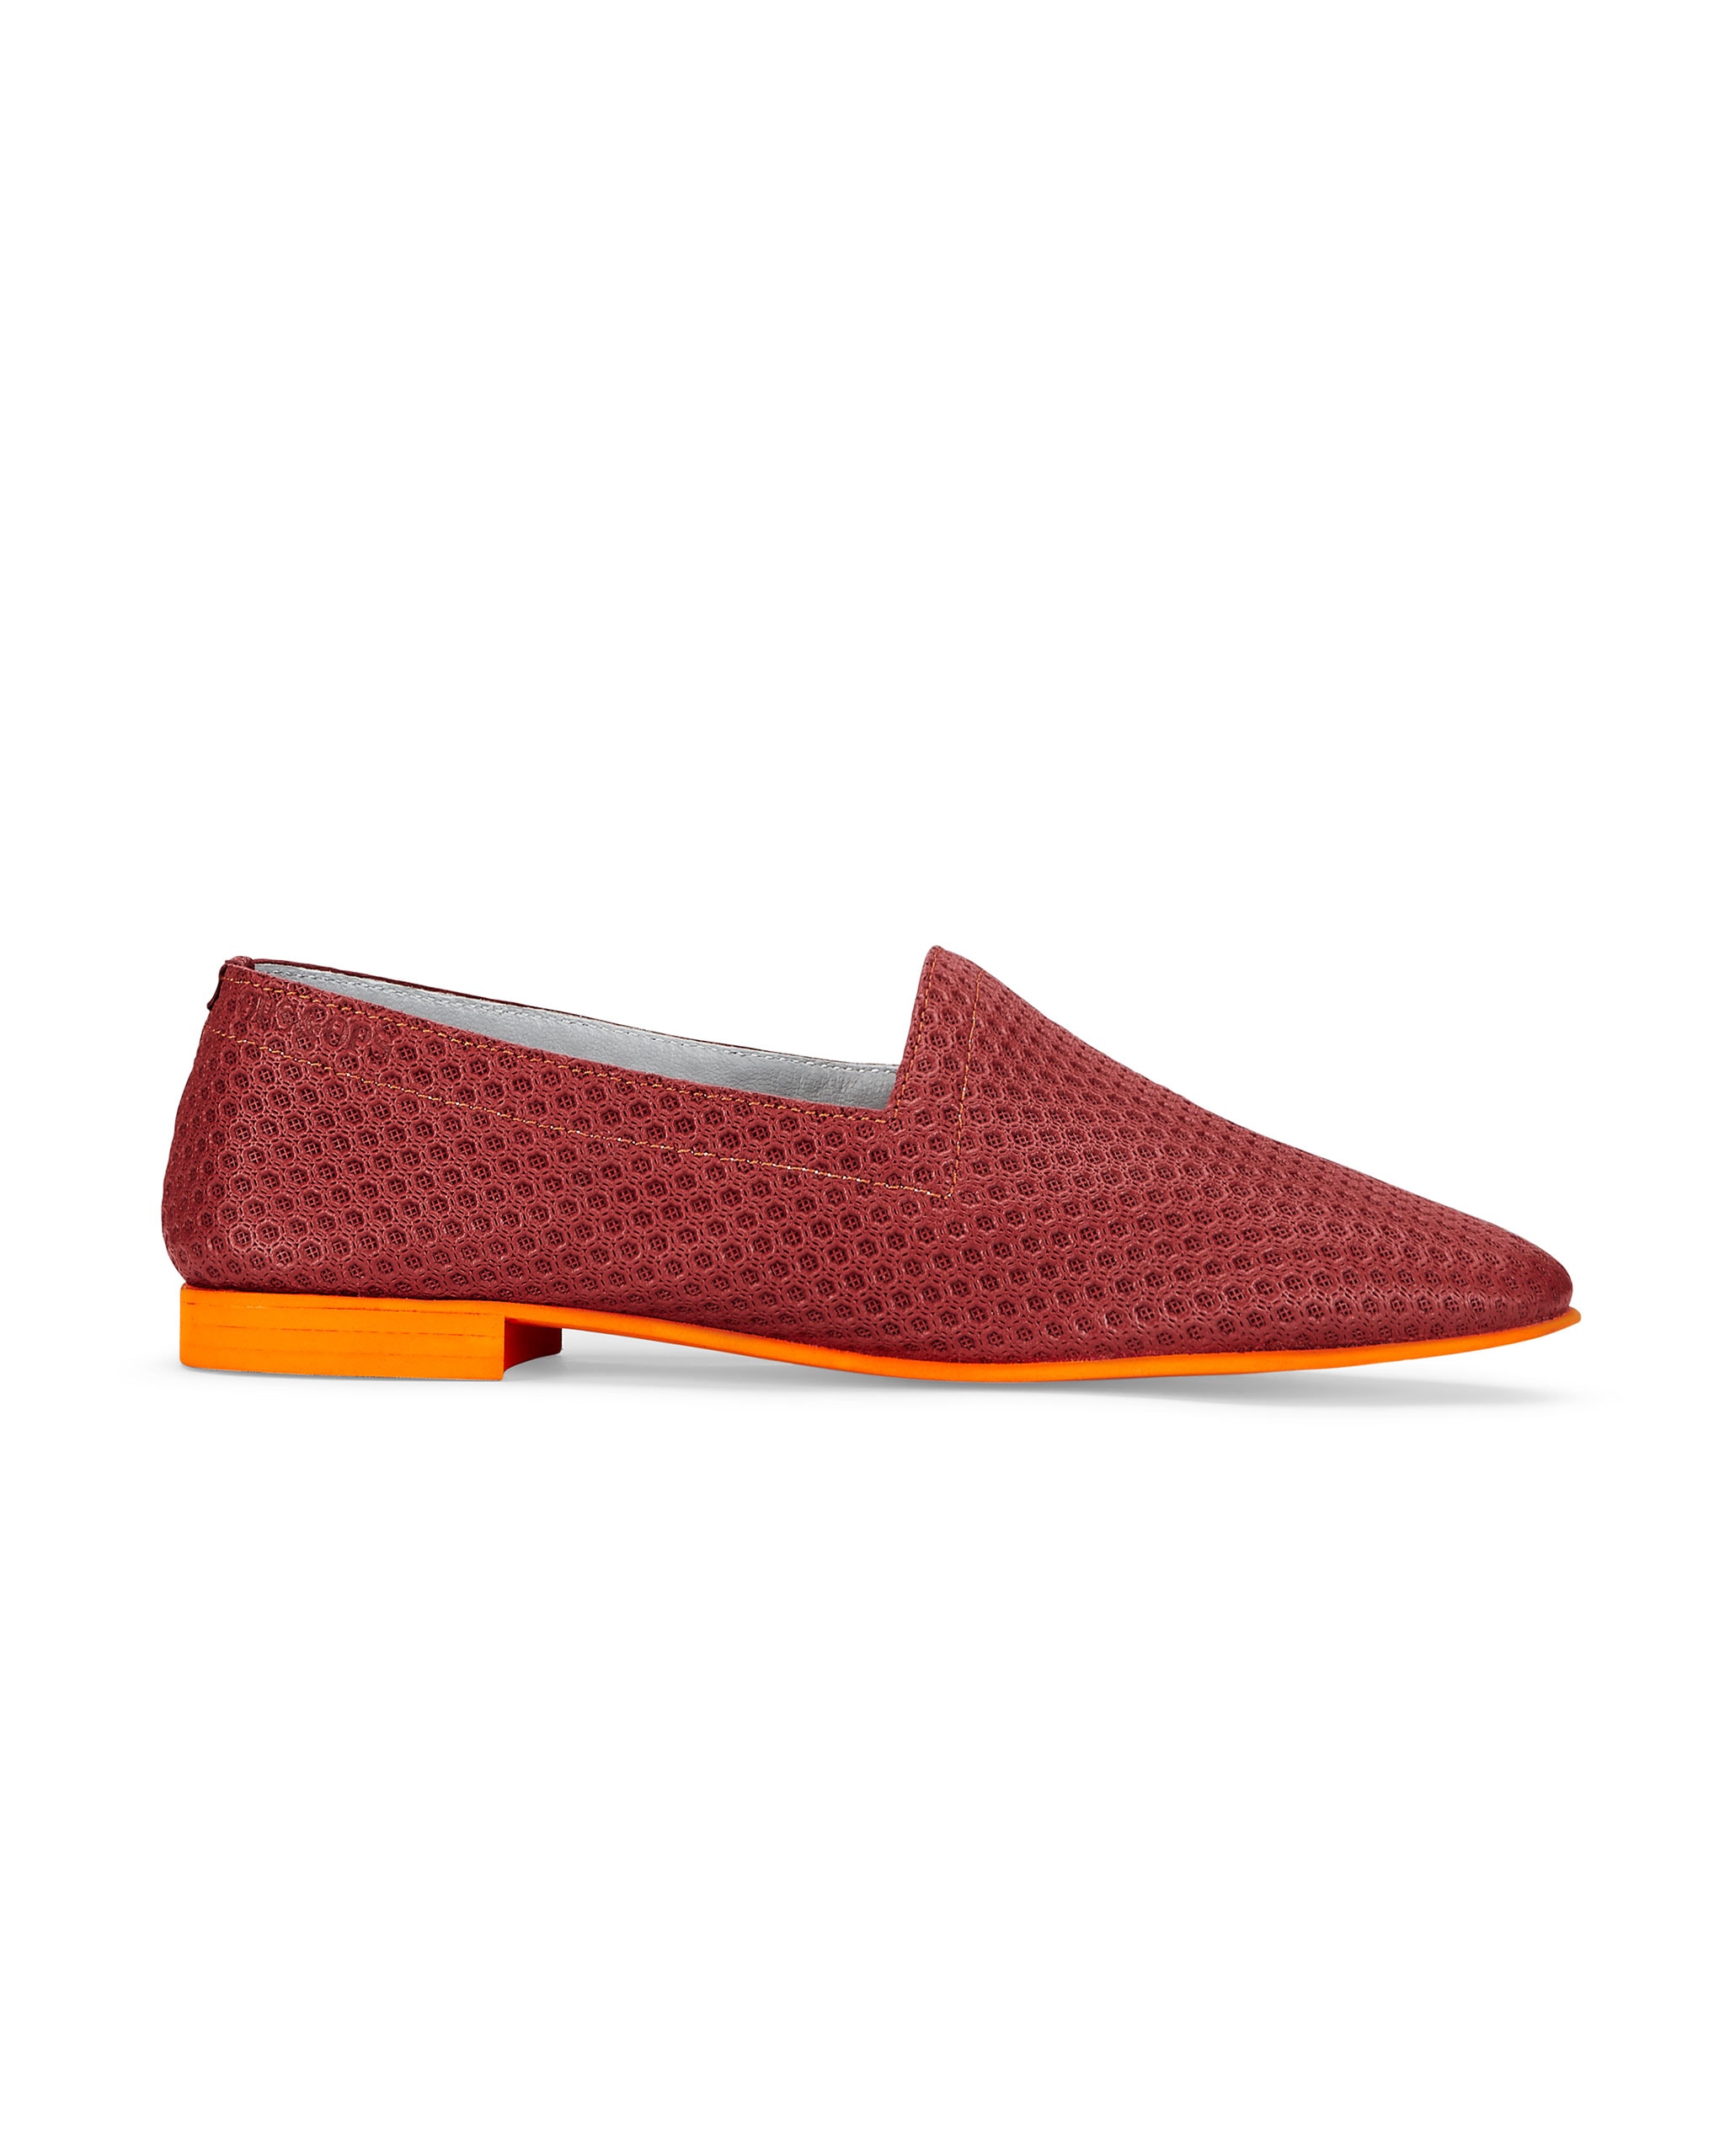 Ops&Ops No10 Action Red perforated leather flats with orange manmade sole and heel, side view